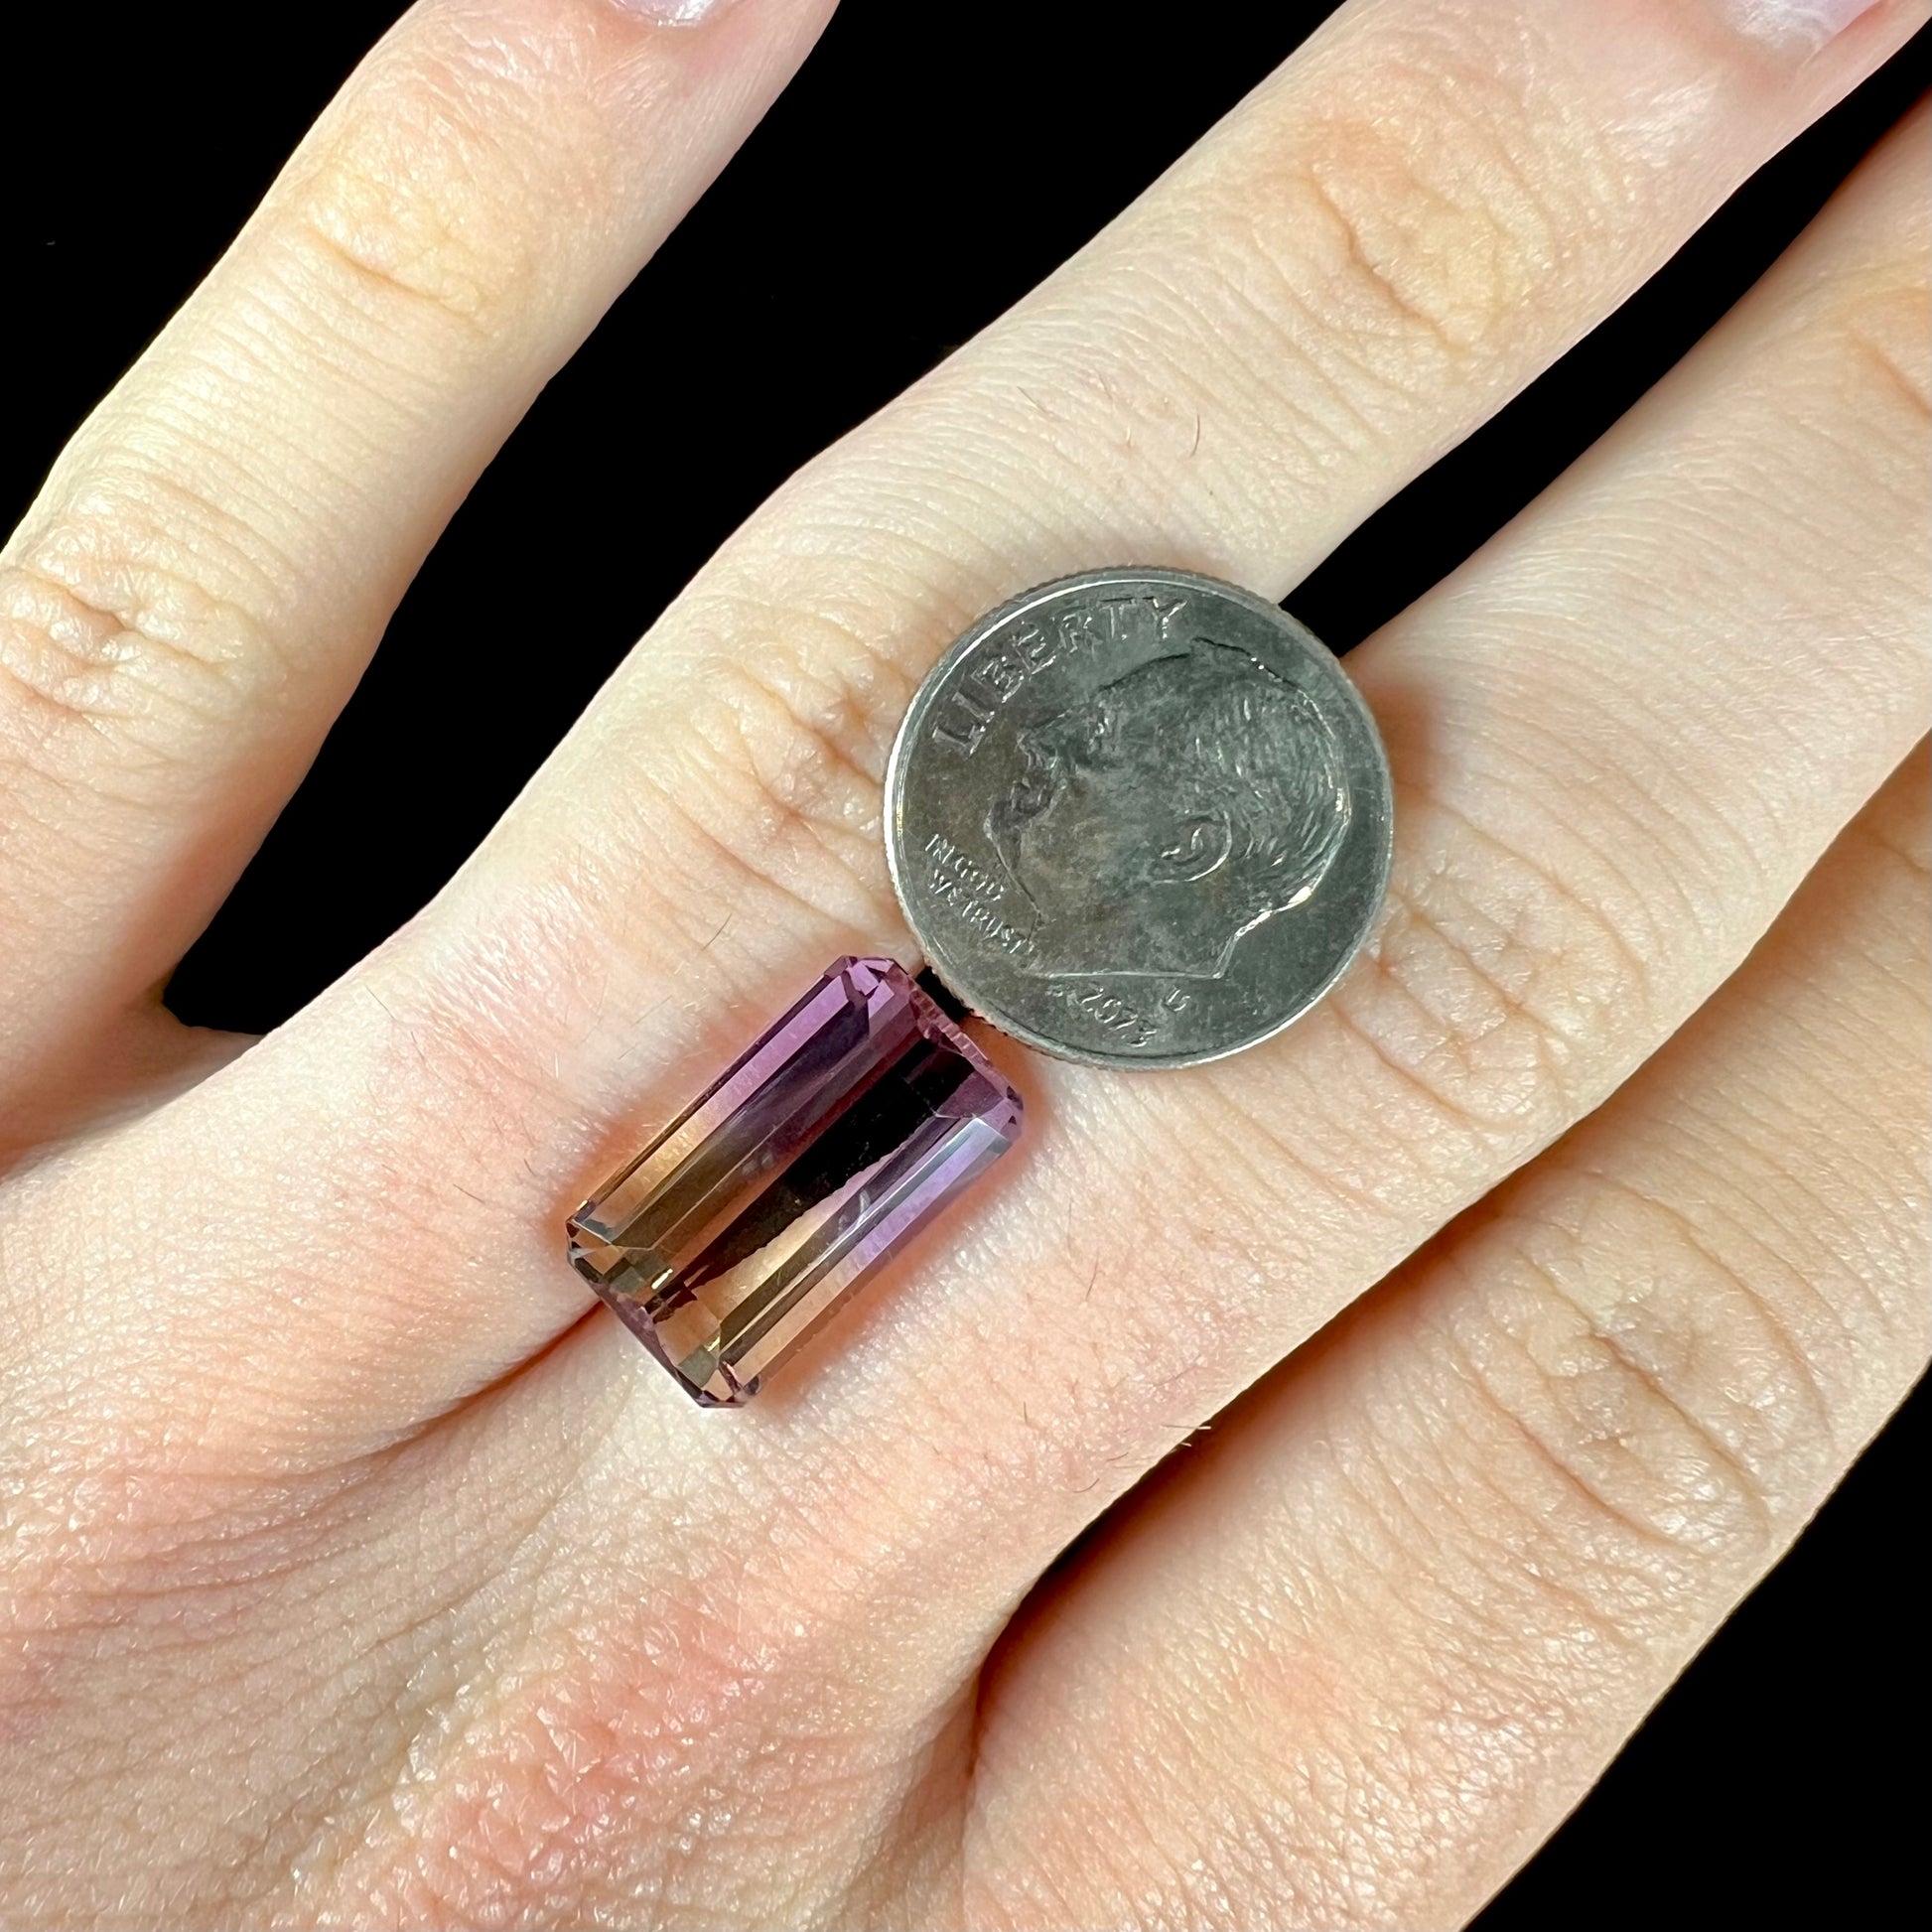 A loose, emerald cut ametrine stone.  The color fades from light purple to light yellow.